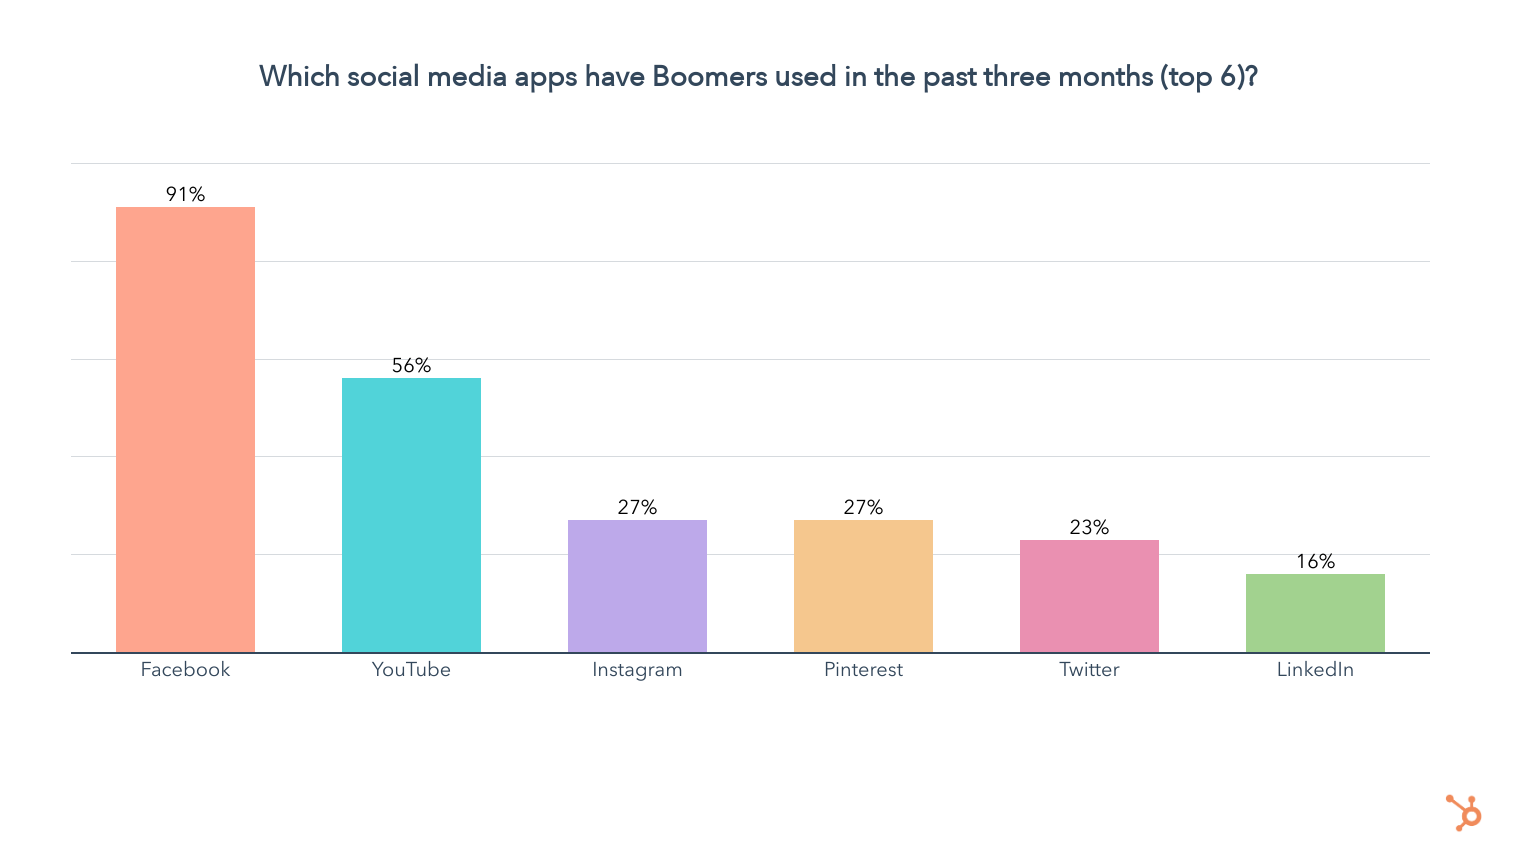 what social media apps have boomerrs used in past 3 months